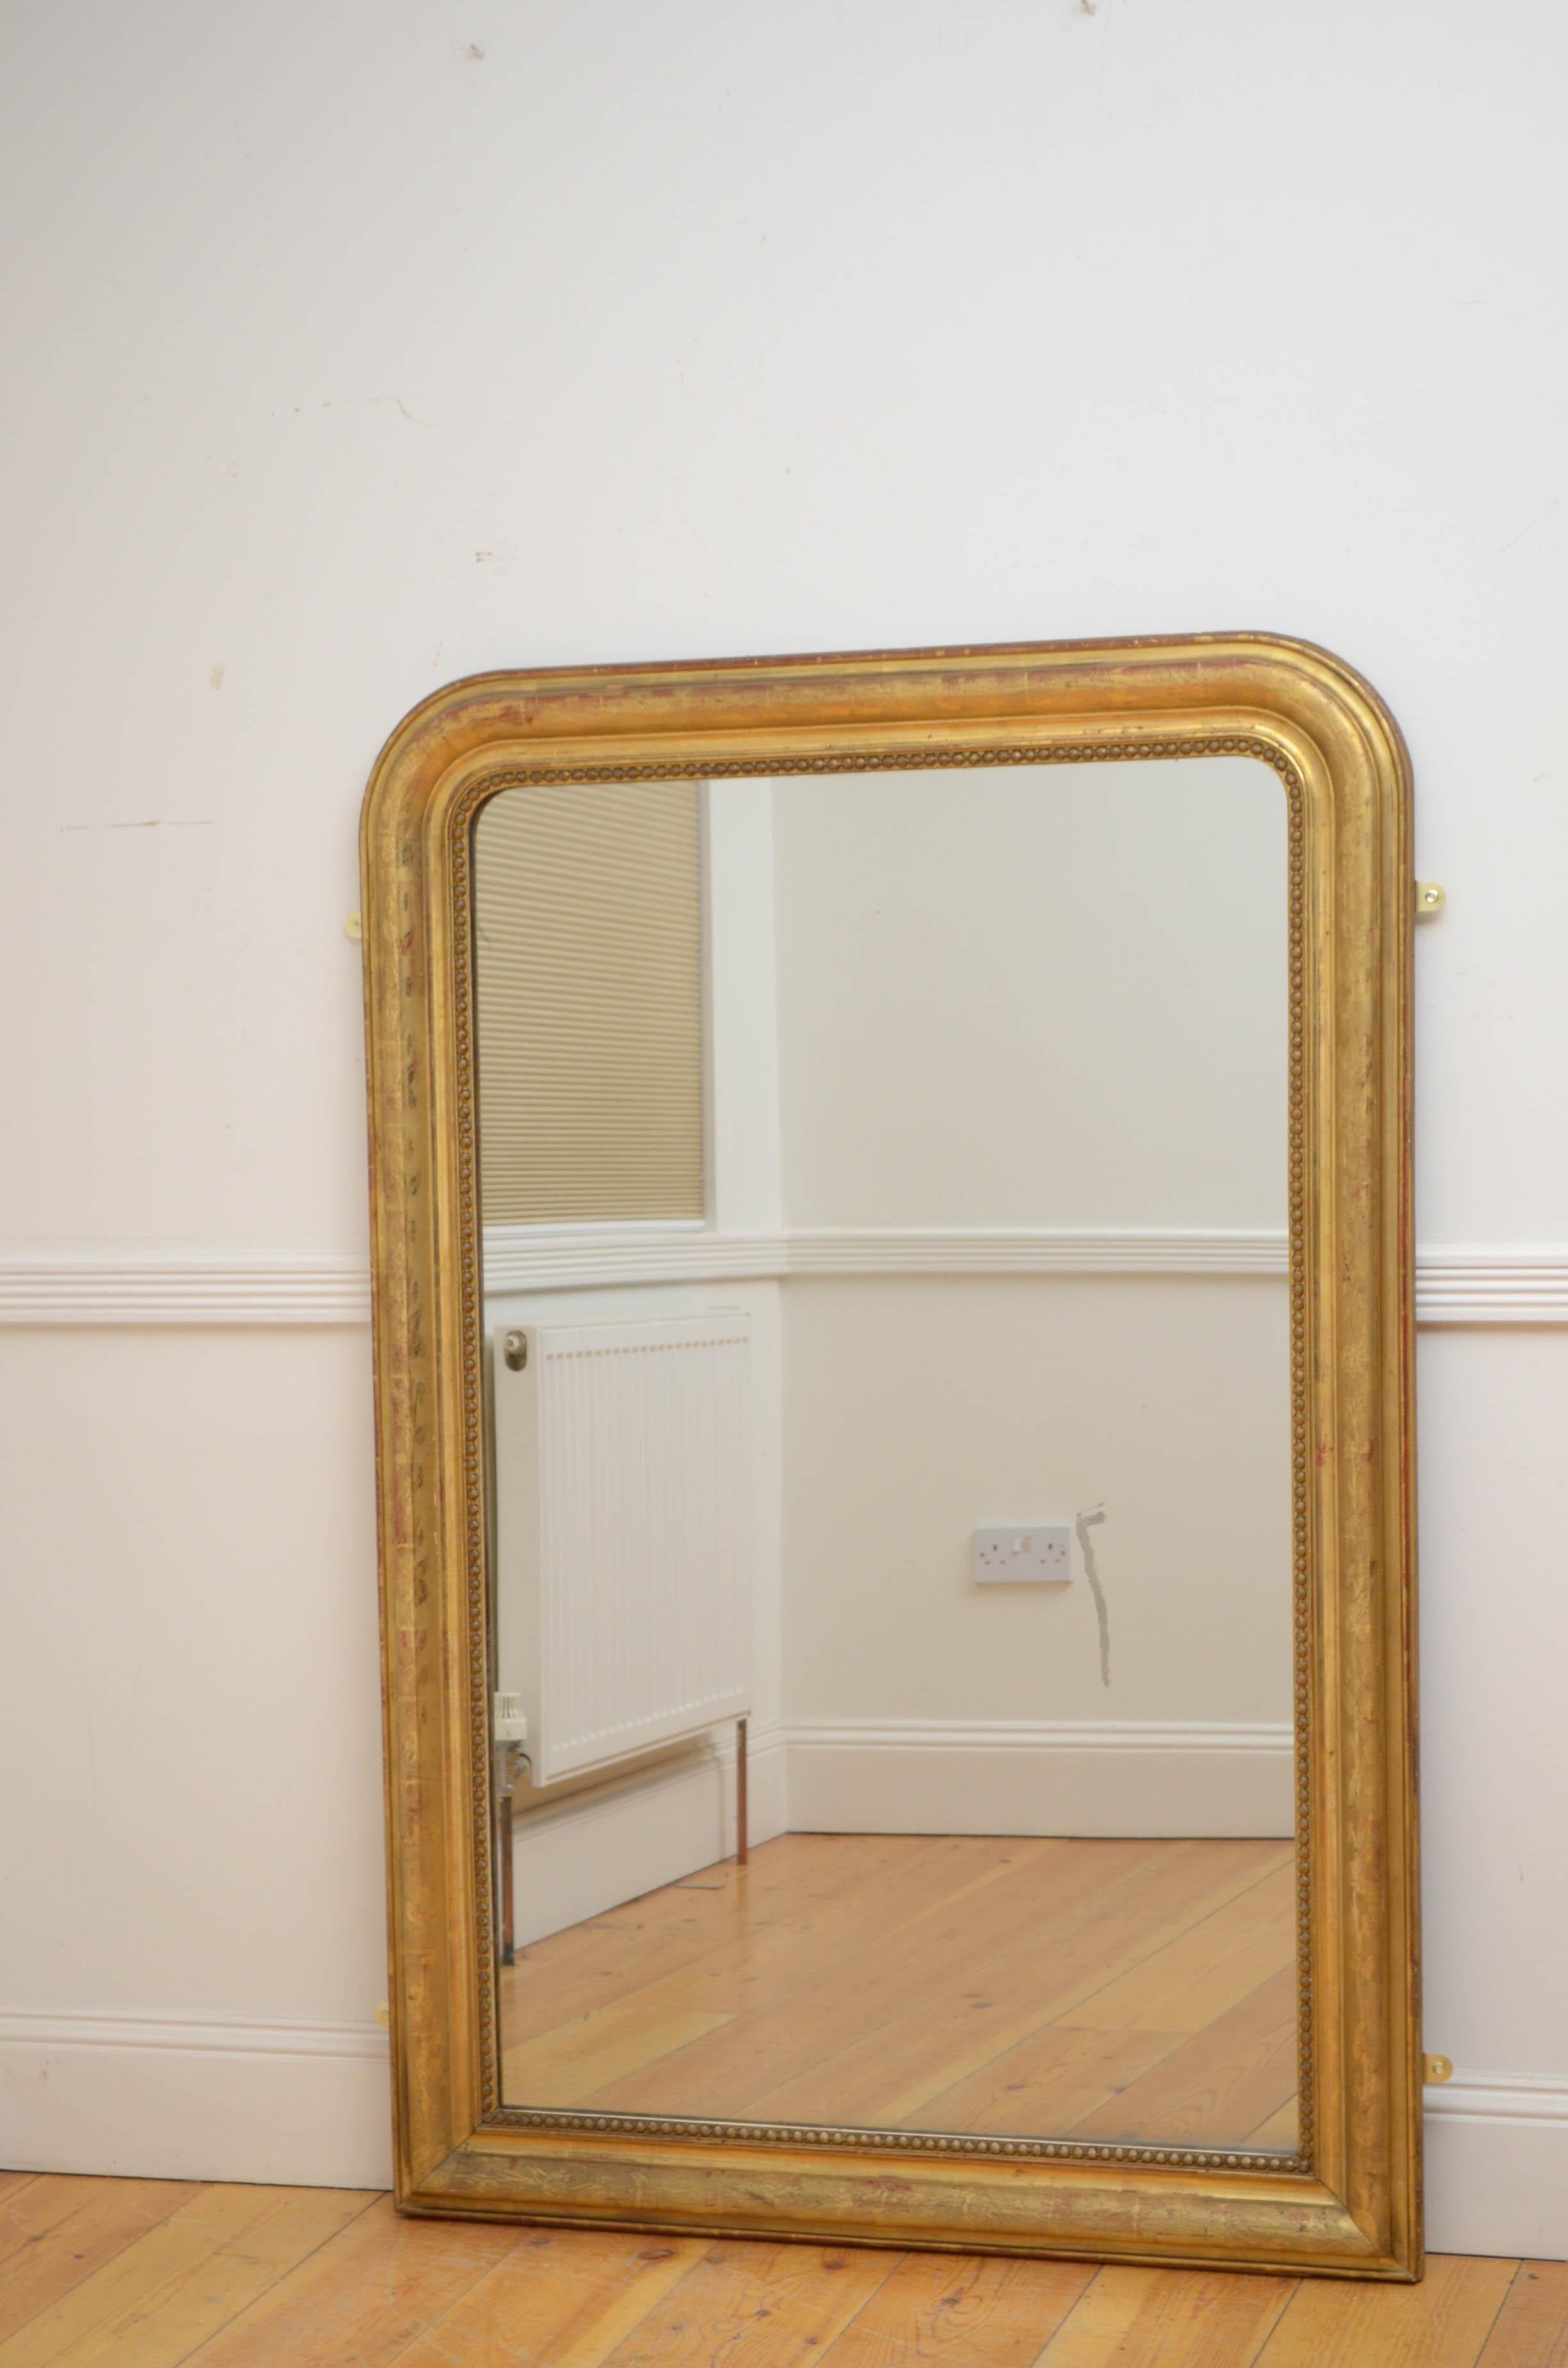 Sn5173 Attractive XIXth century gilt wall or pier mirror, having original glass with some imperfections - please see photos, in beaded and moulded frame with floral decoration. This antique mirror retains its original glass, original gilt and